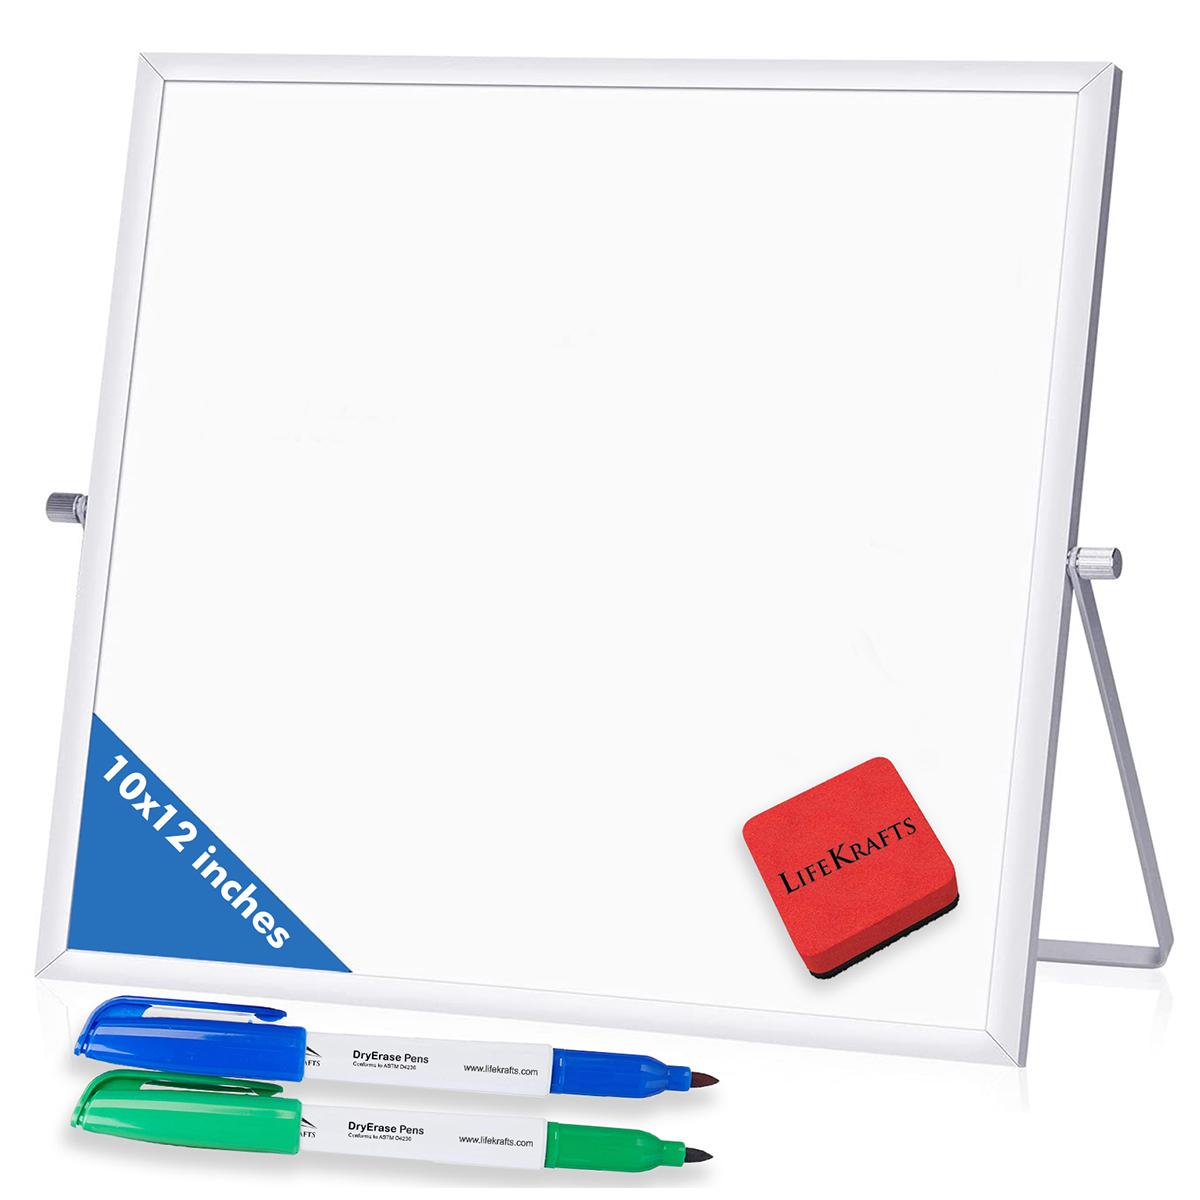 Home School 10” x 10” Portable Mini Dry Erase Whiteboard for Students Double Side to Do List Dry Erase Board with Stand for Office Small Desktop White Board 